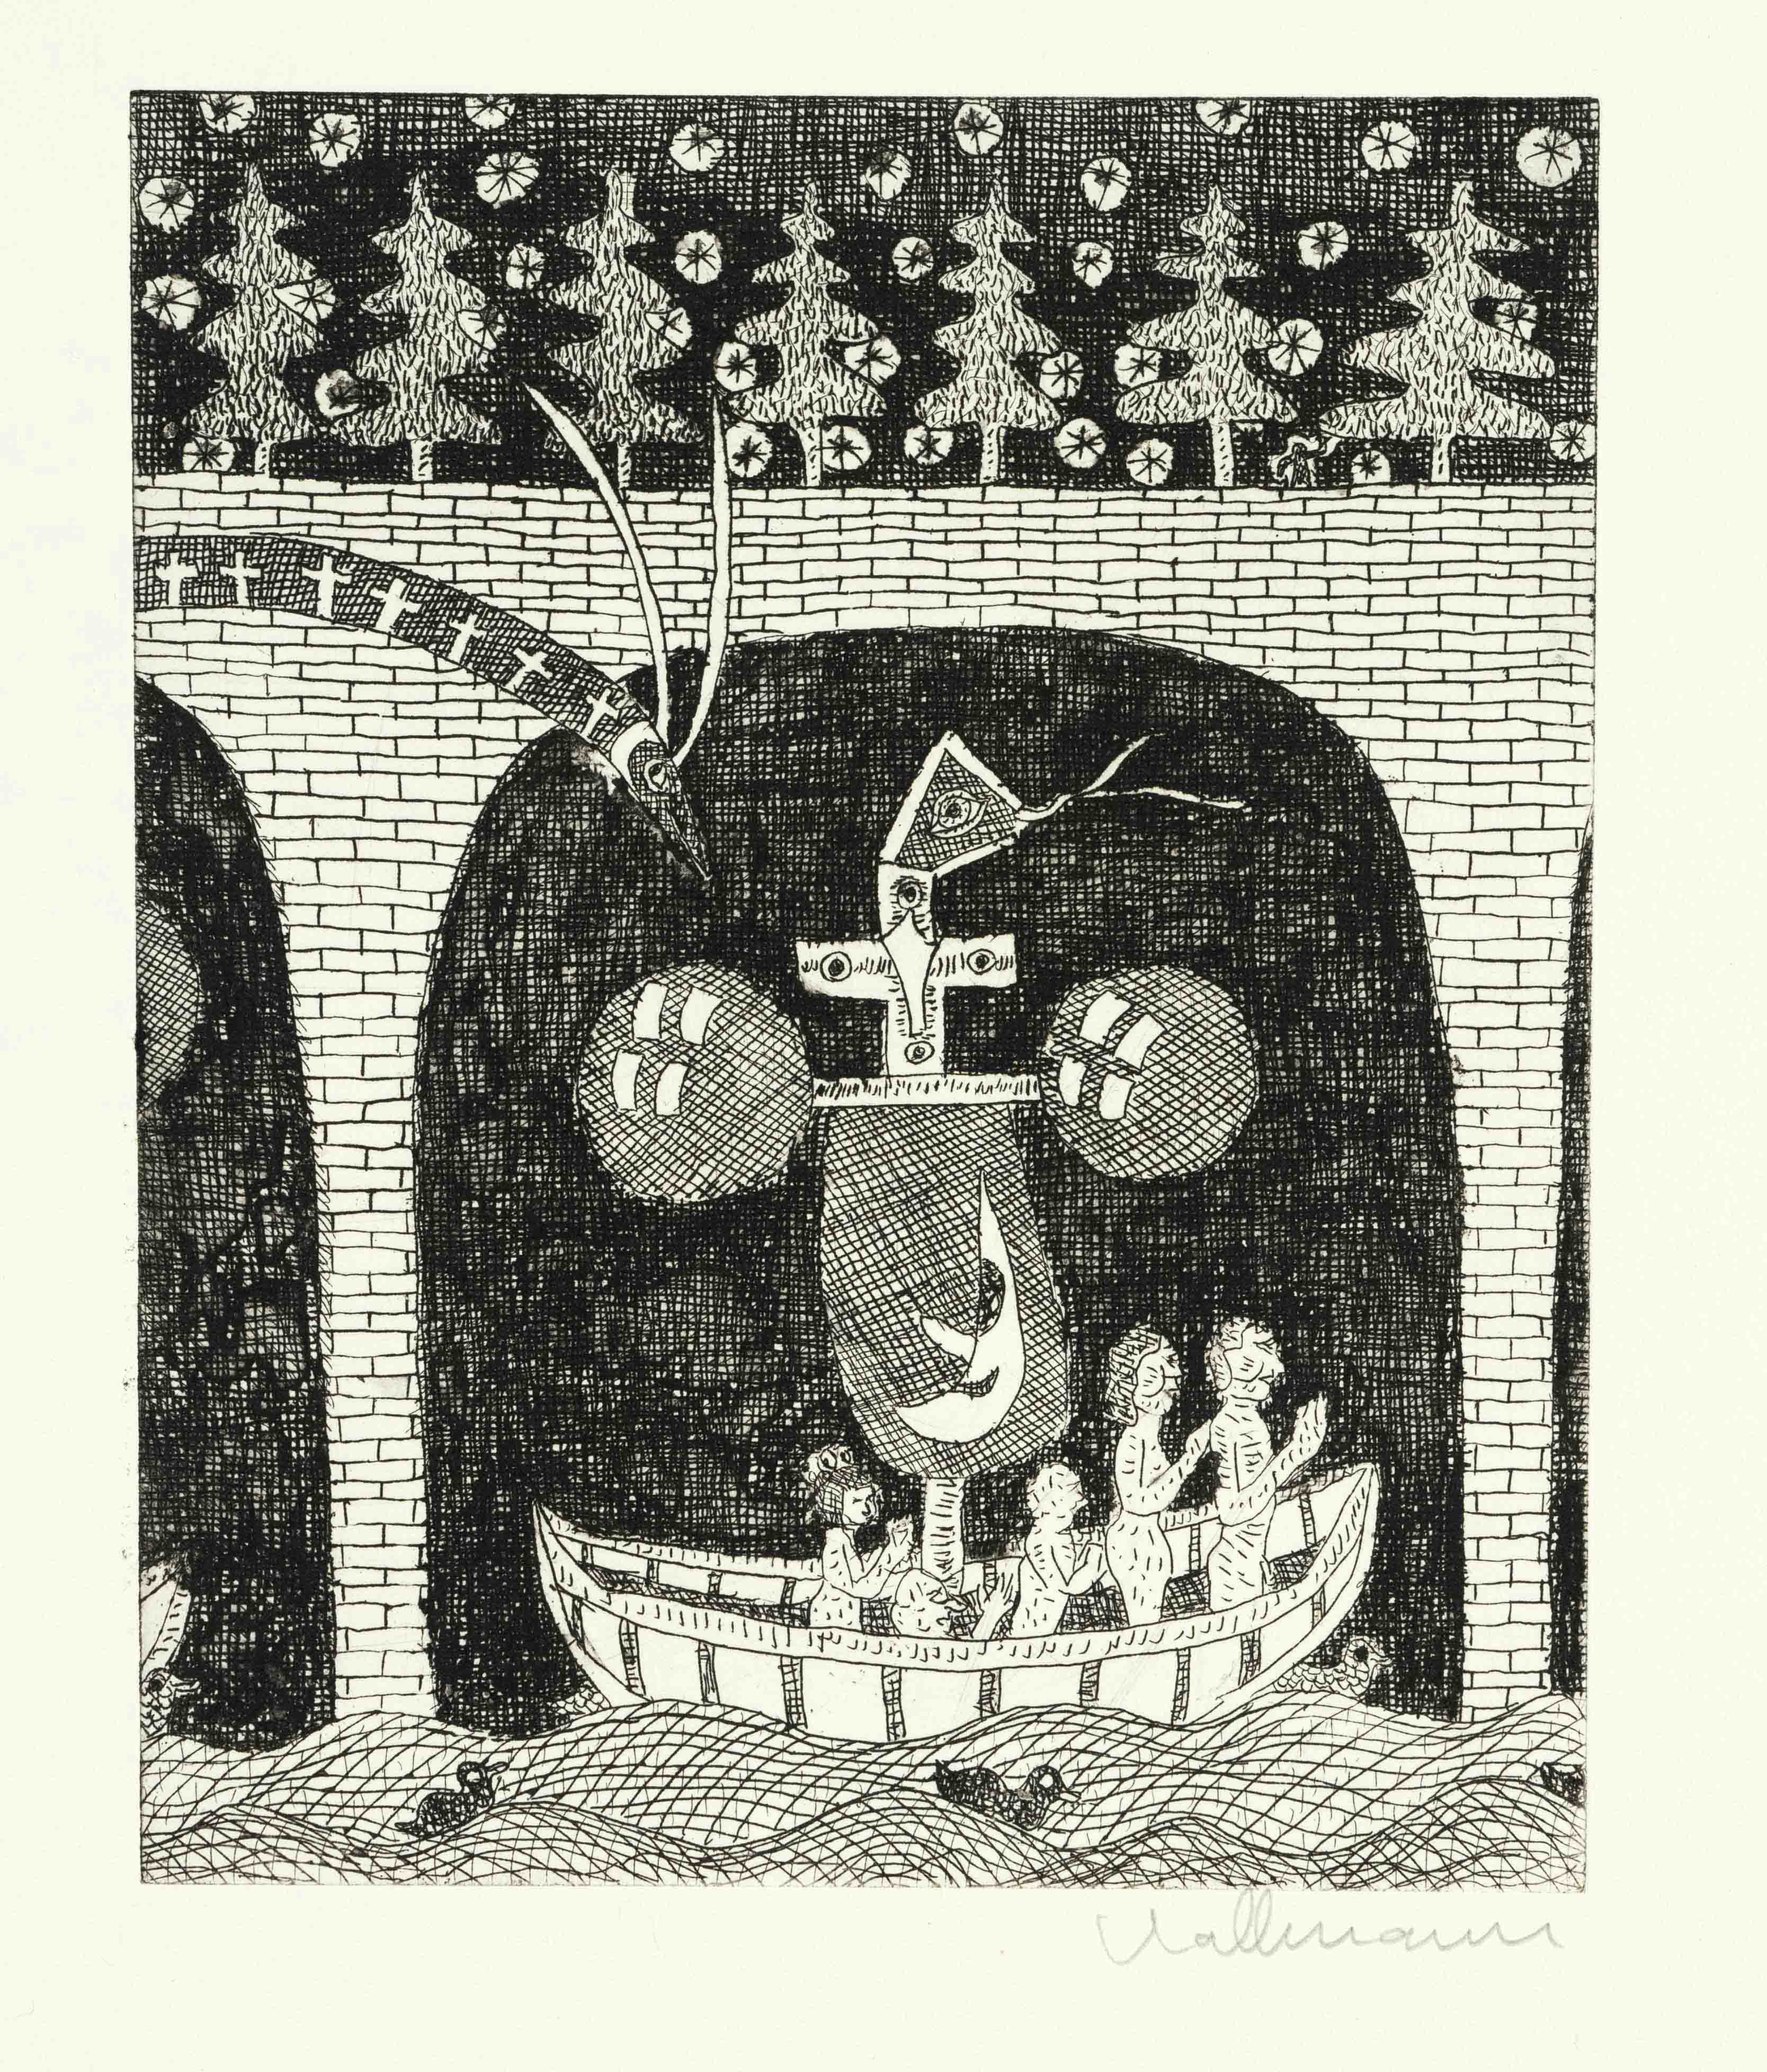 Group of 6 etchings by various artists of the 20th century: Kurt Mühlenhaupt (1921-2006), Concert, - Image 2 of 3